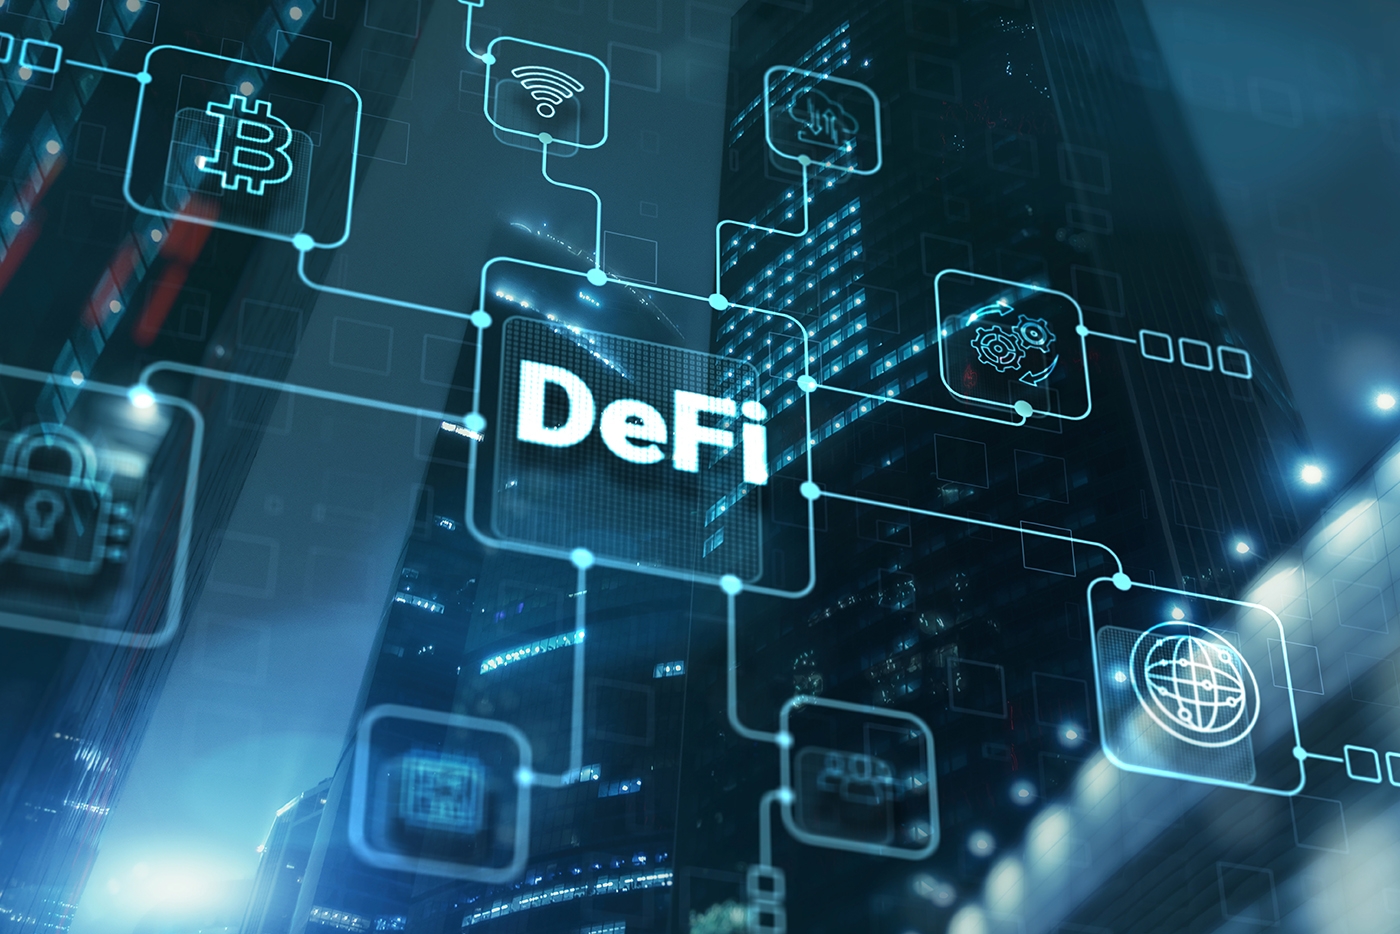 From DeFi To ReFi: How The Future Internet Will Upend Your Financial World | Bernard Marr